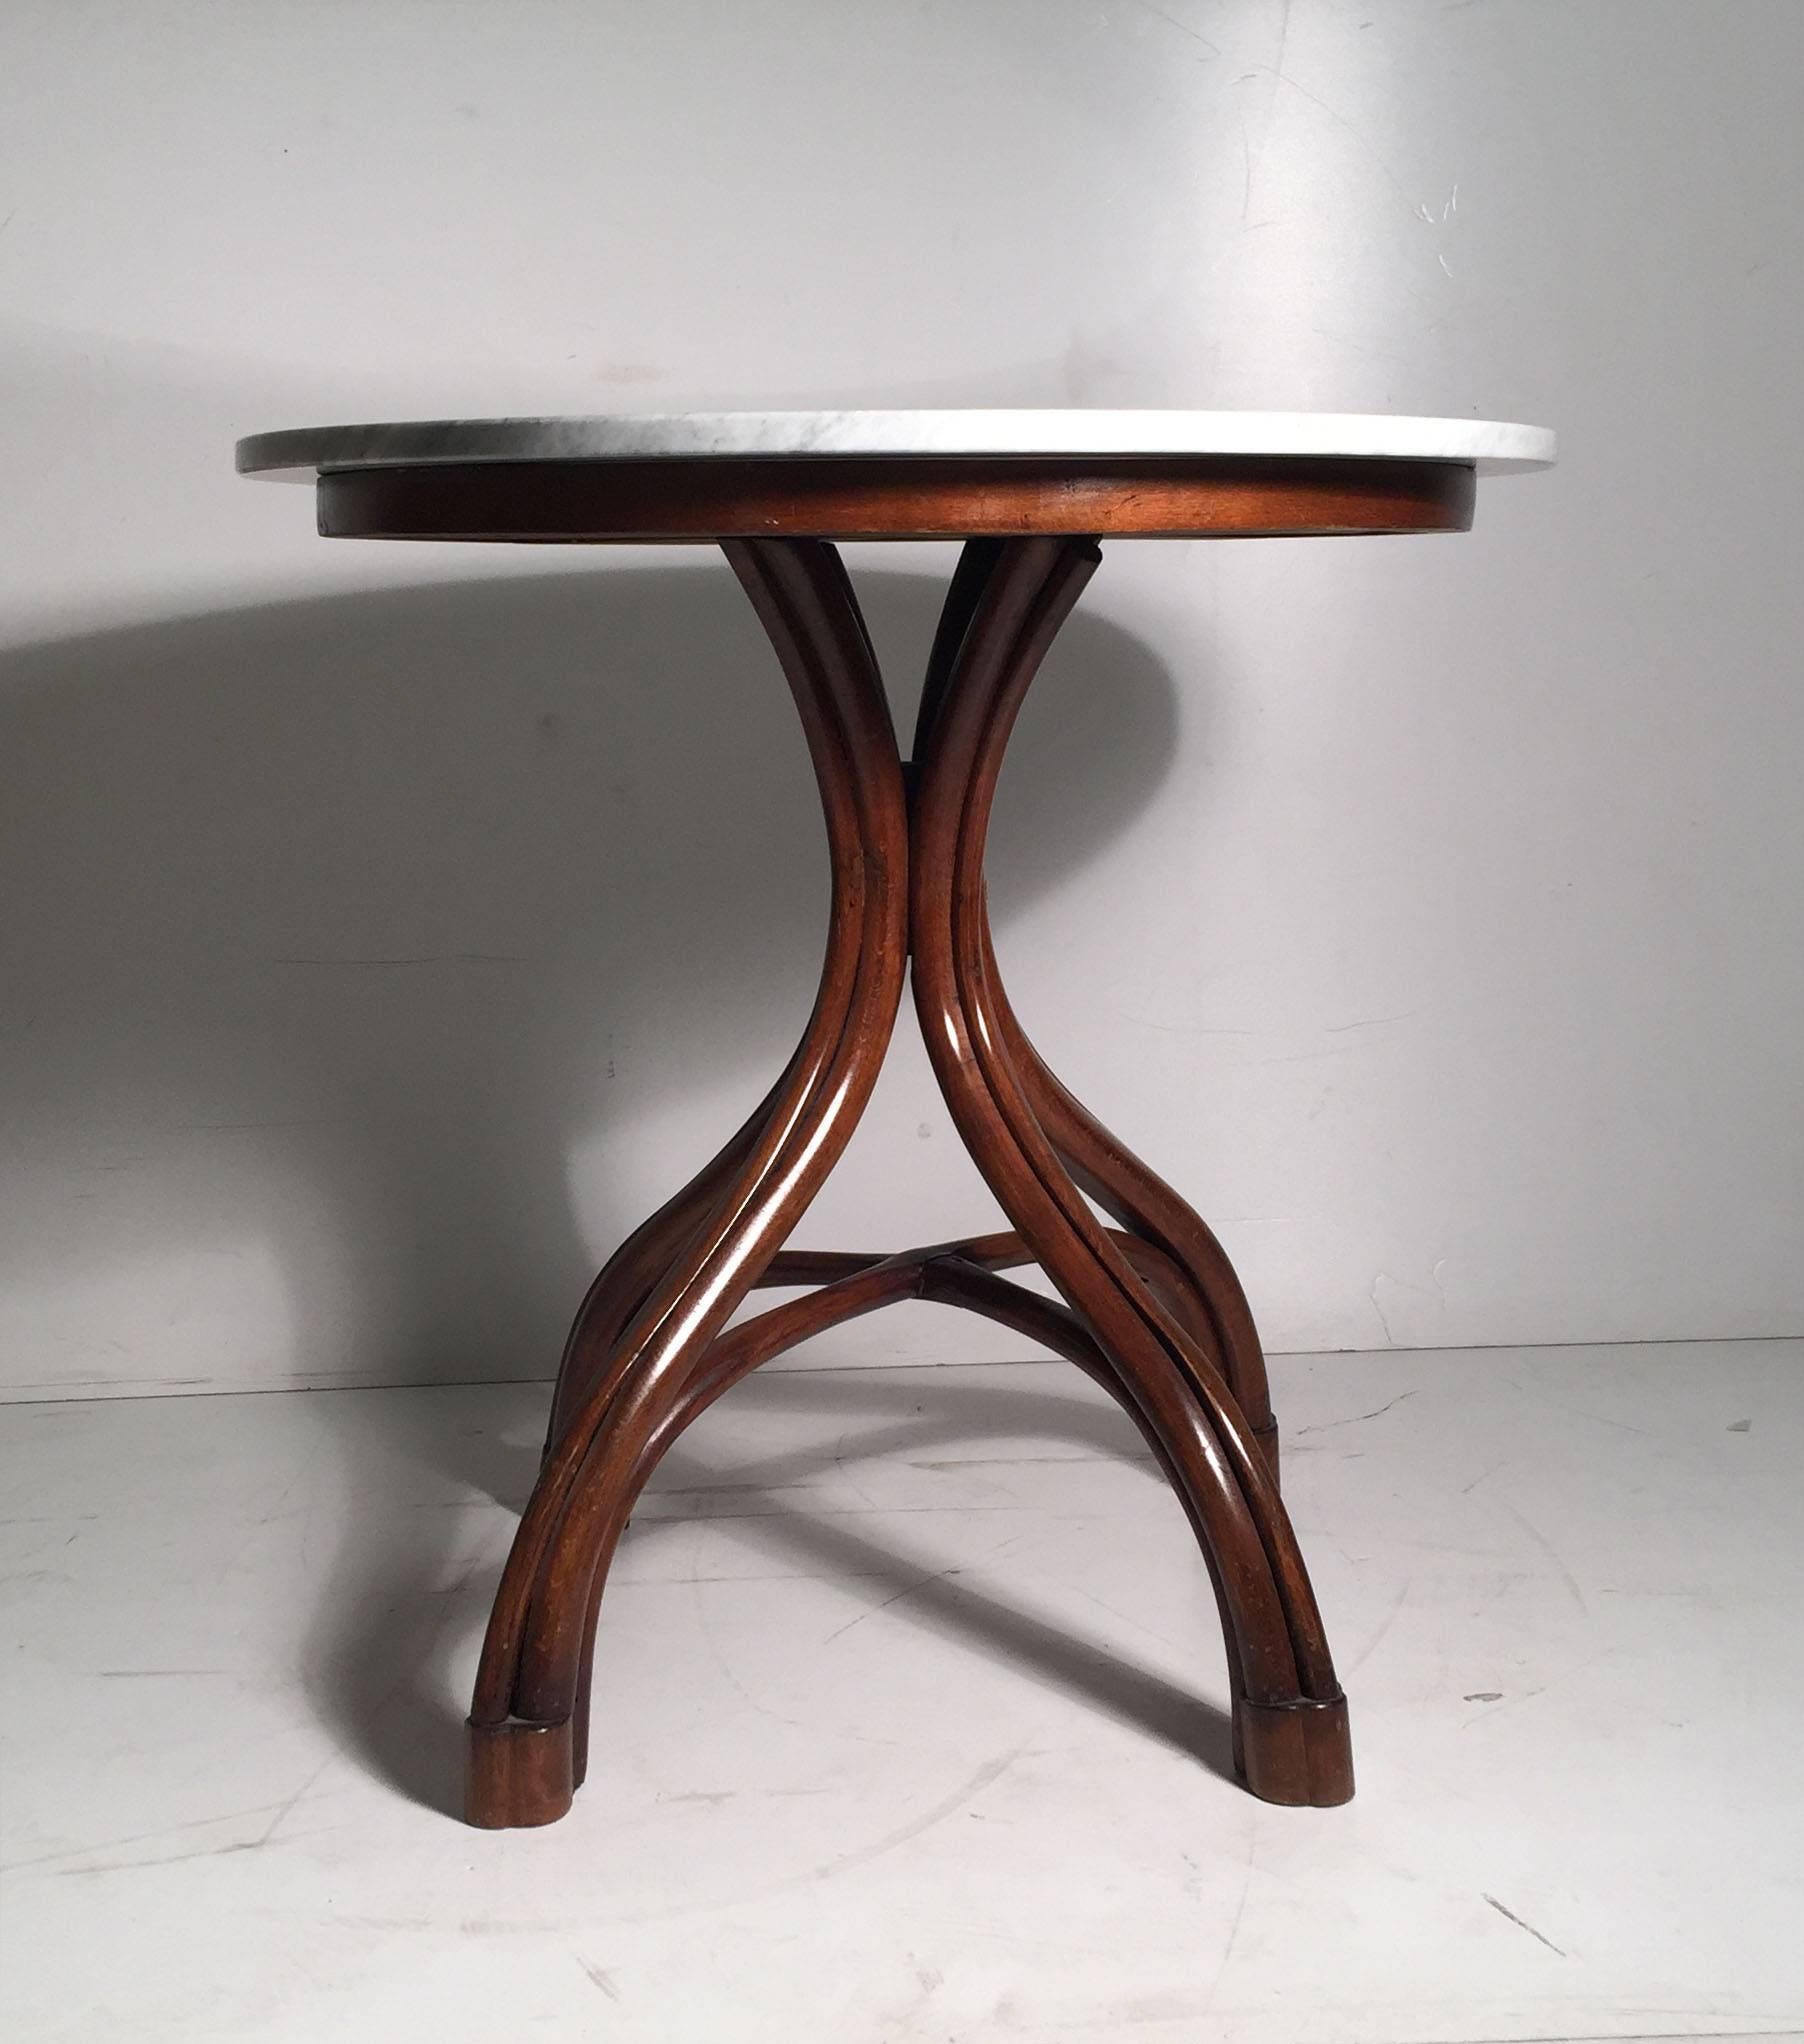 Beautiful vintage bentwood small cafe dining or dinette table. Also makes for a nice side table. We have another matching one listed if you desire a matching pair. This one was refinished at one time and includes a nice round marble top that works